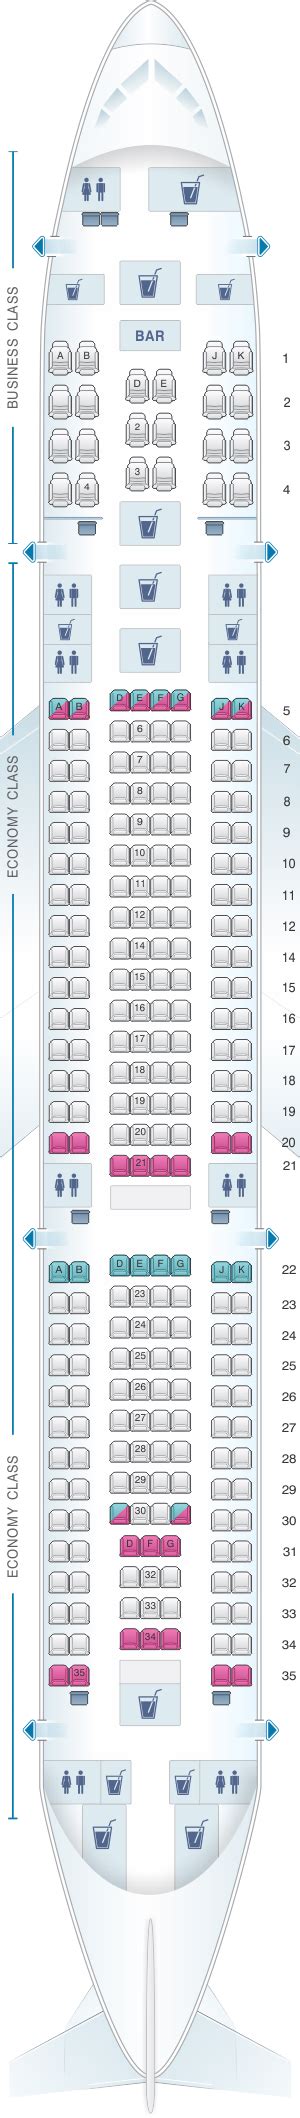 turkish airlines seat chart